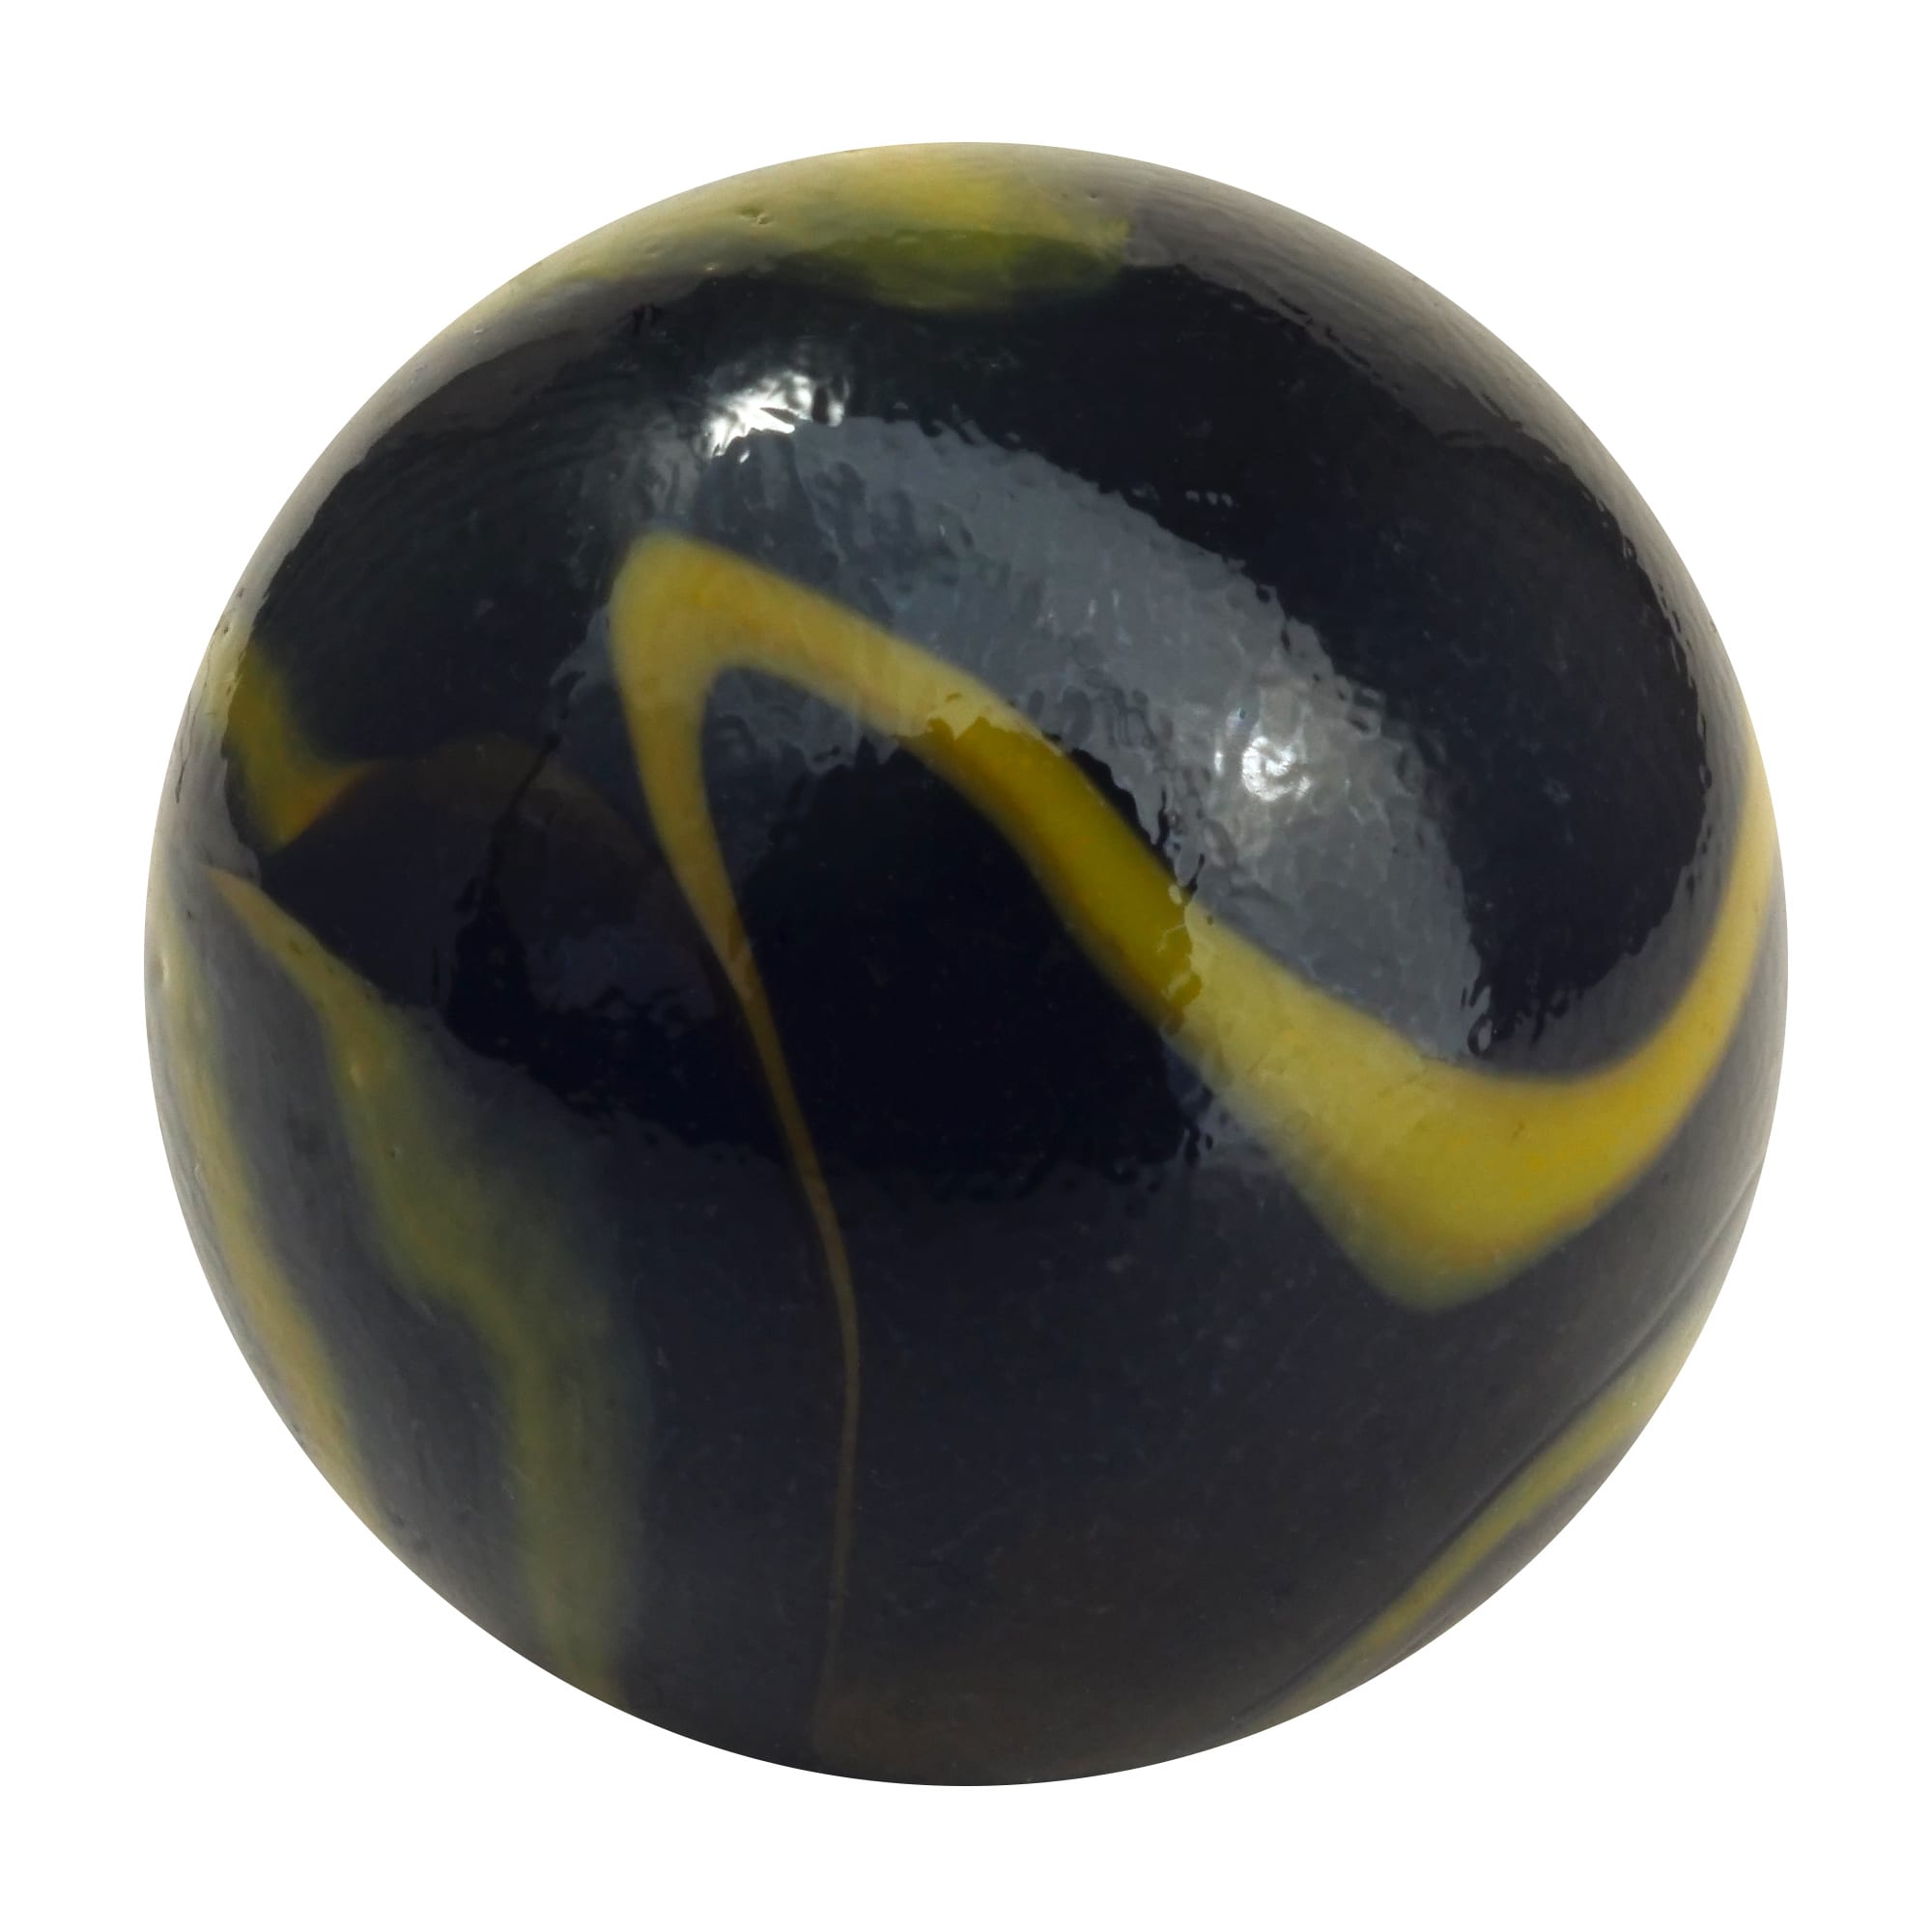 MARBLES 2 POUNDS OF 1 INCH POISON DART FROG MEGA MARBLES FREE SHIPPING 